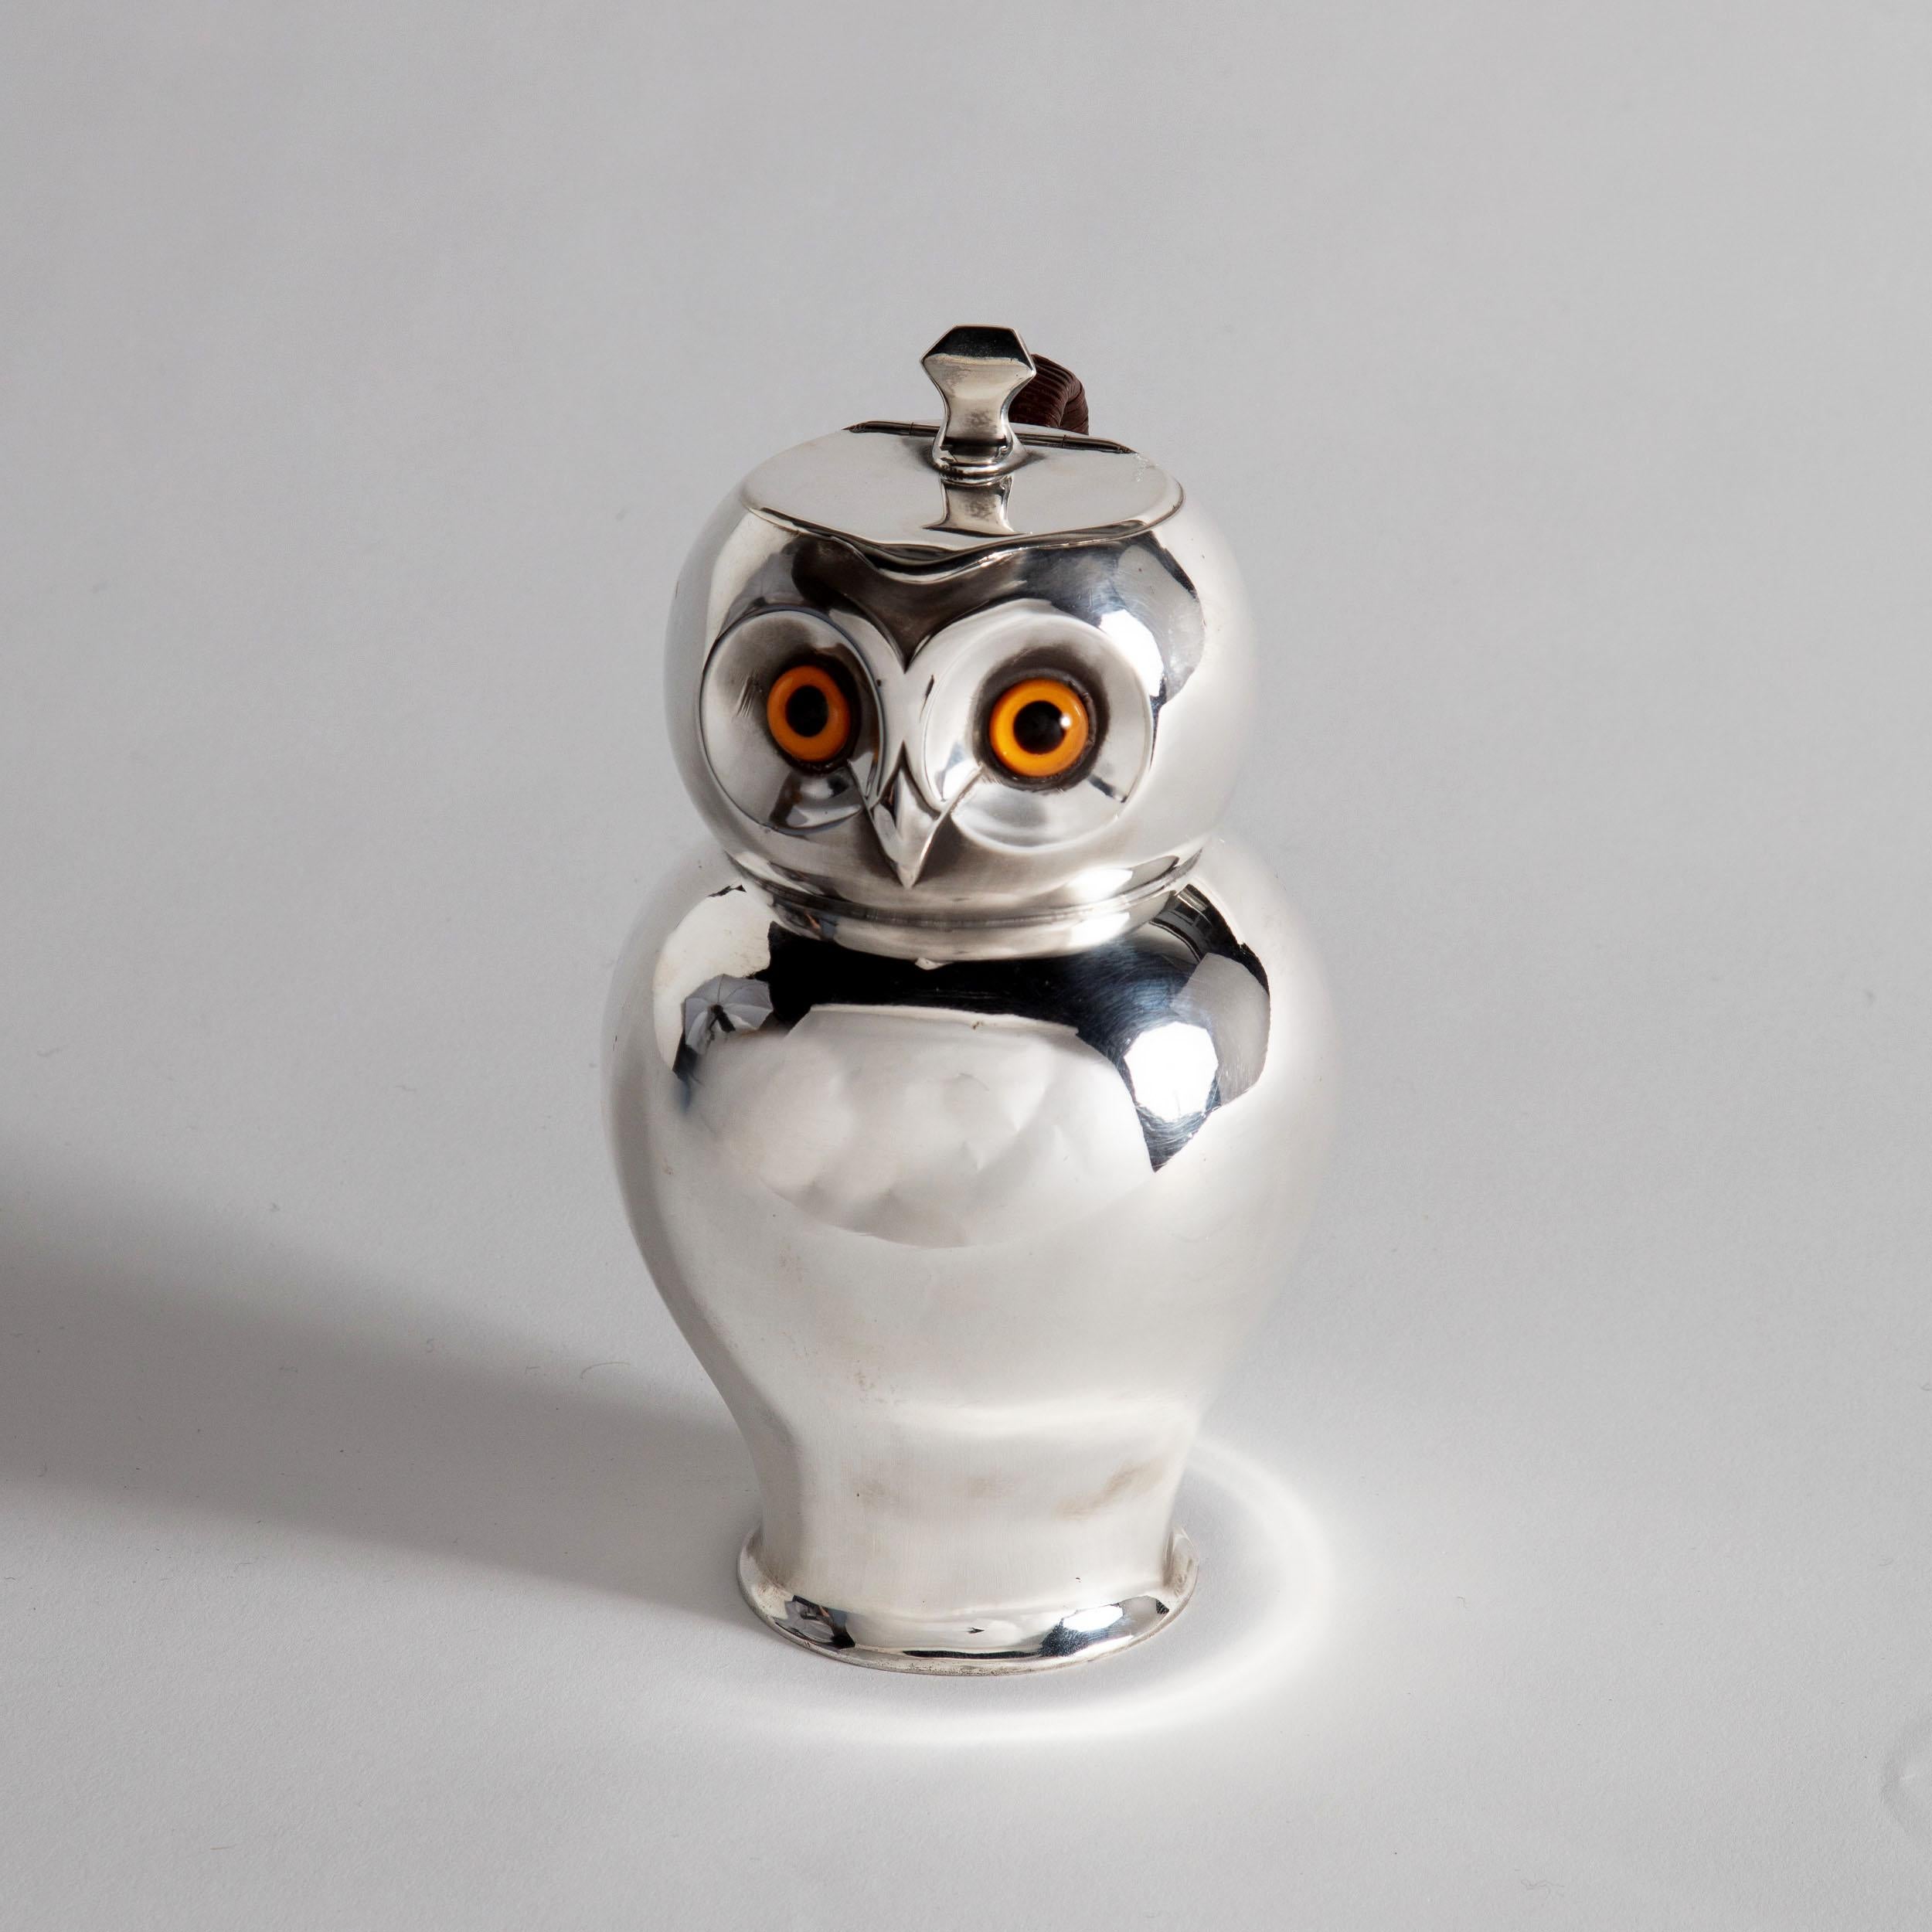 Silver Plate 19th Century Silver Hot Chocolate Pot in the Form of an Owl, HJ LINTON, Paris